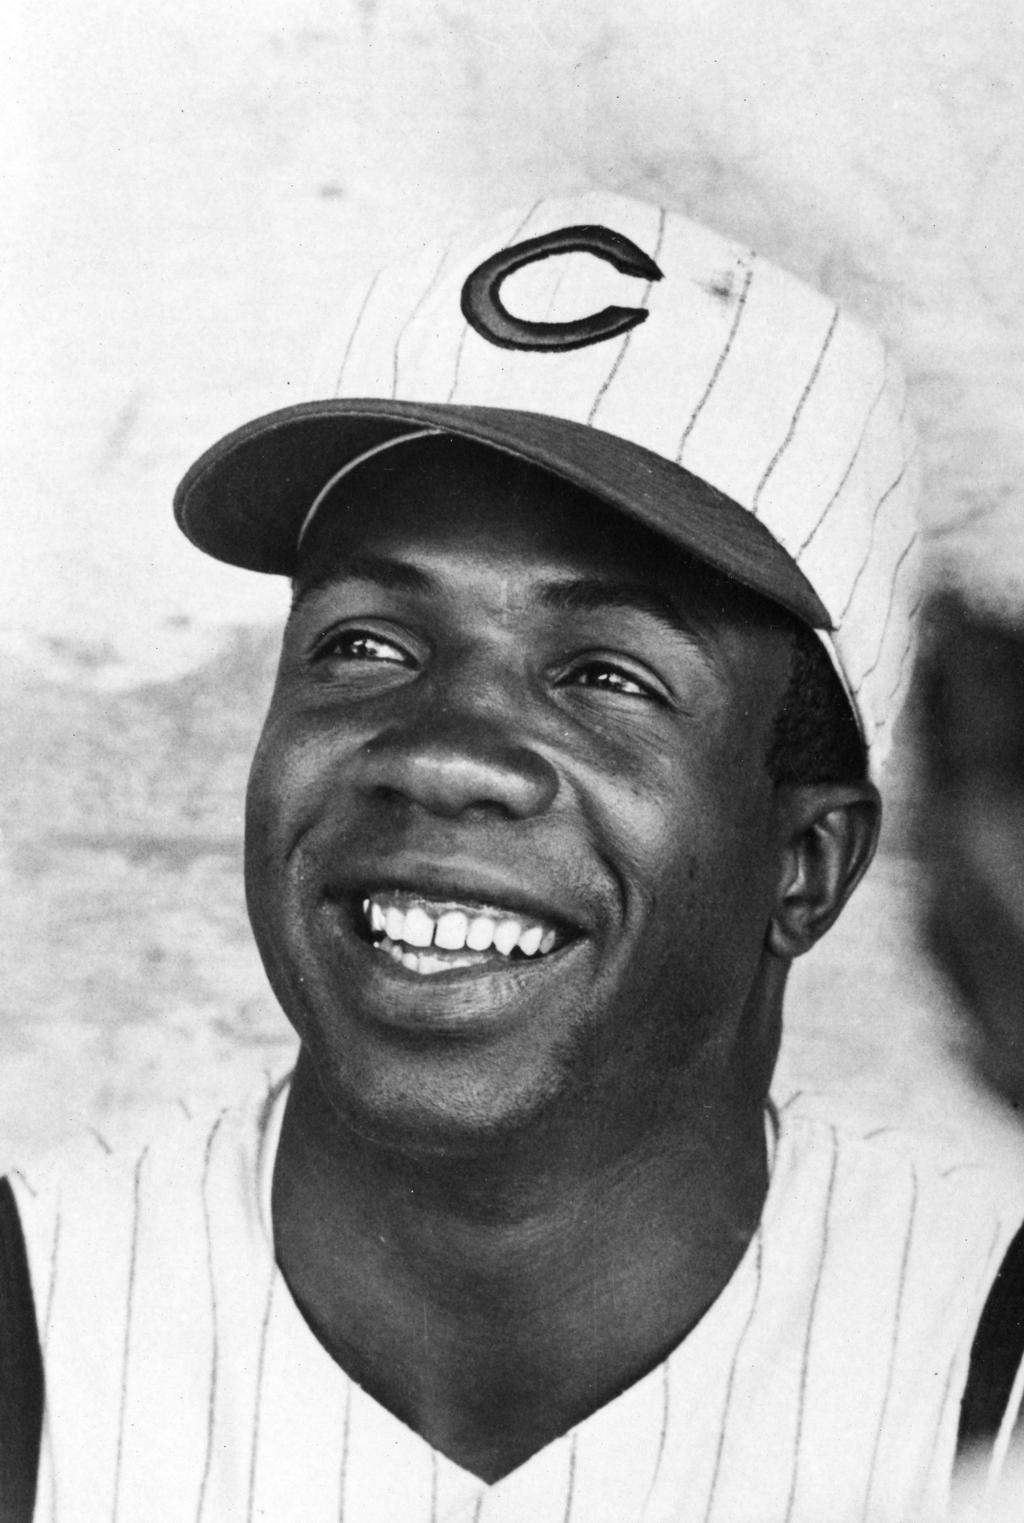 Communication Arts - Level 3 Frank Robinson Known for his temperamental ways early in his career, Frank Robinson overcame fights on the field and a brief brush with the law to become one of the